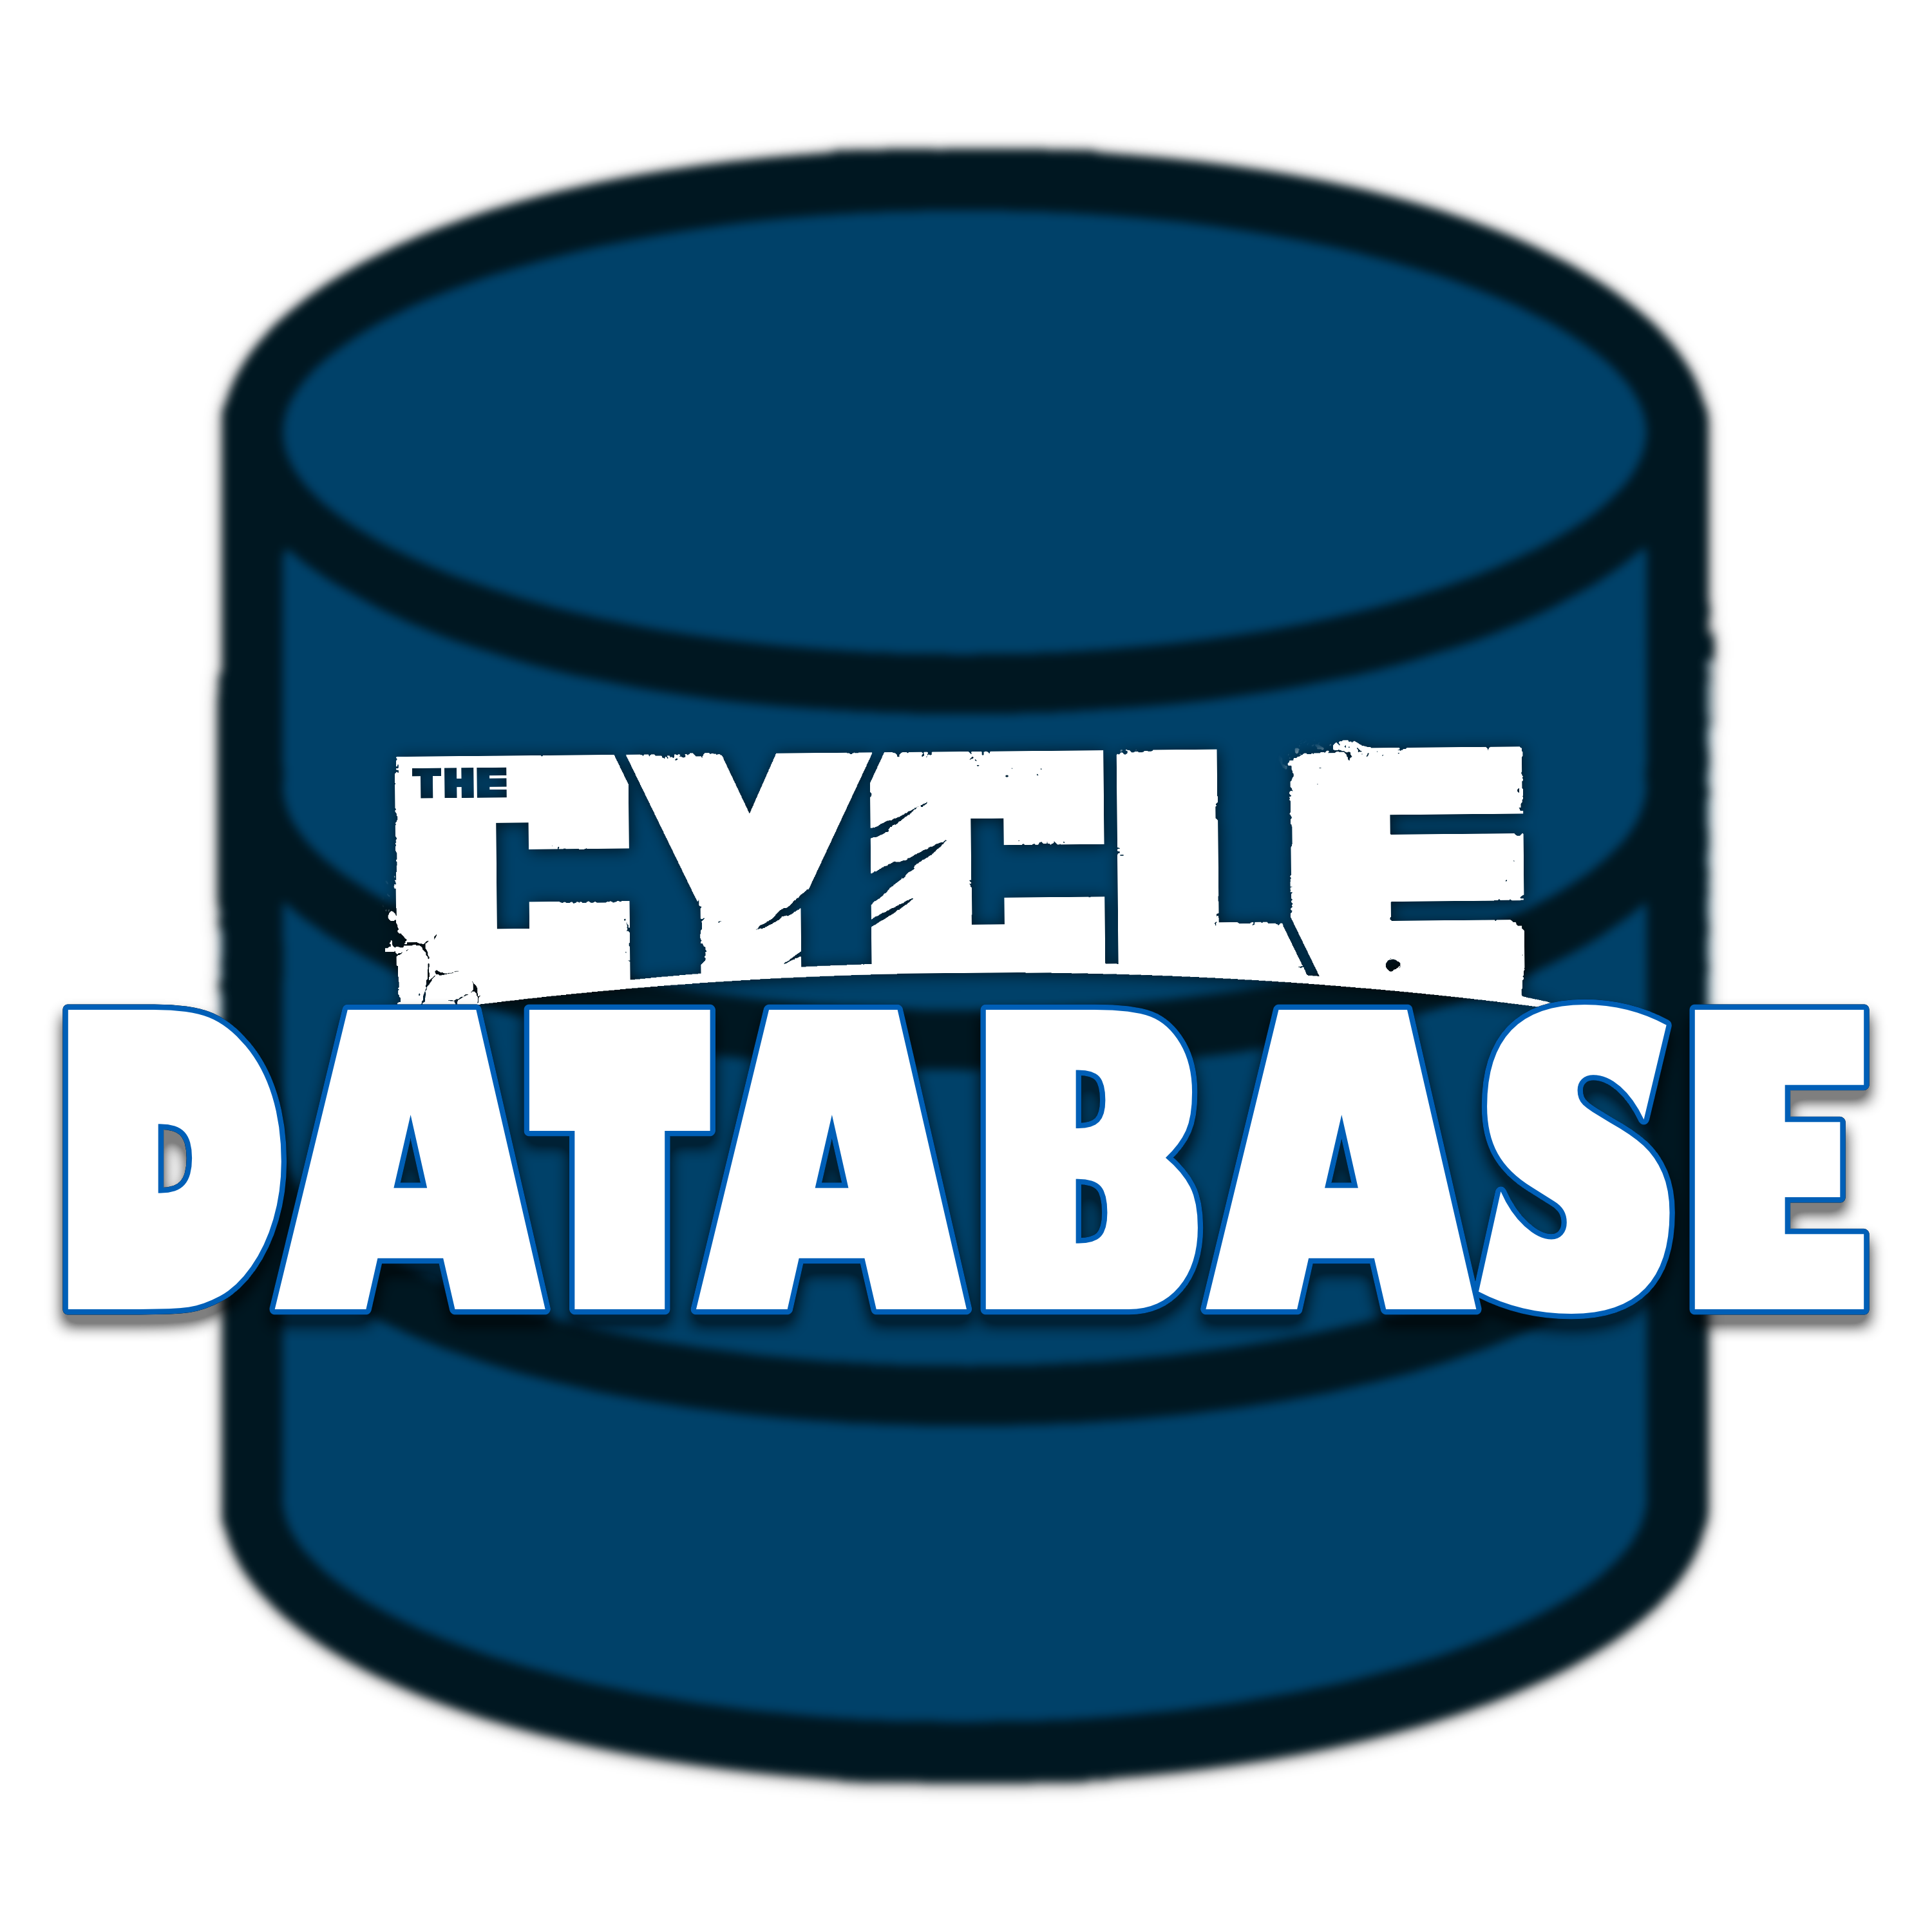 An Update From The Cycle Database Team